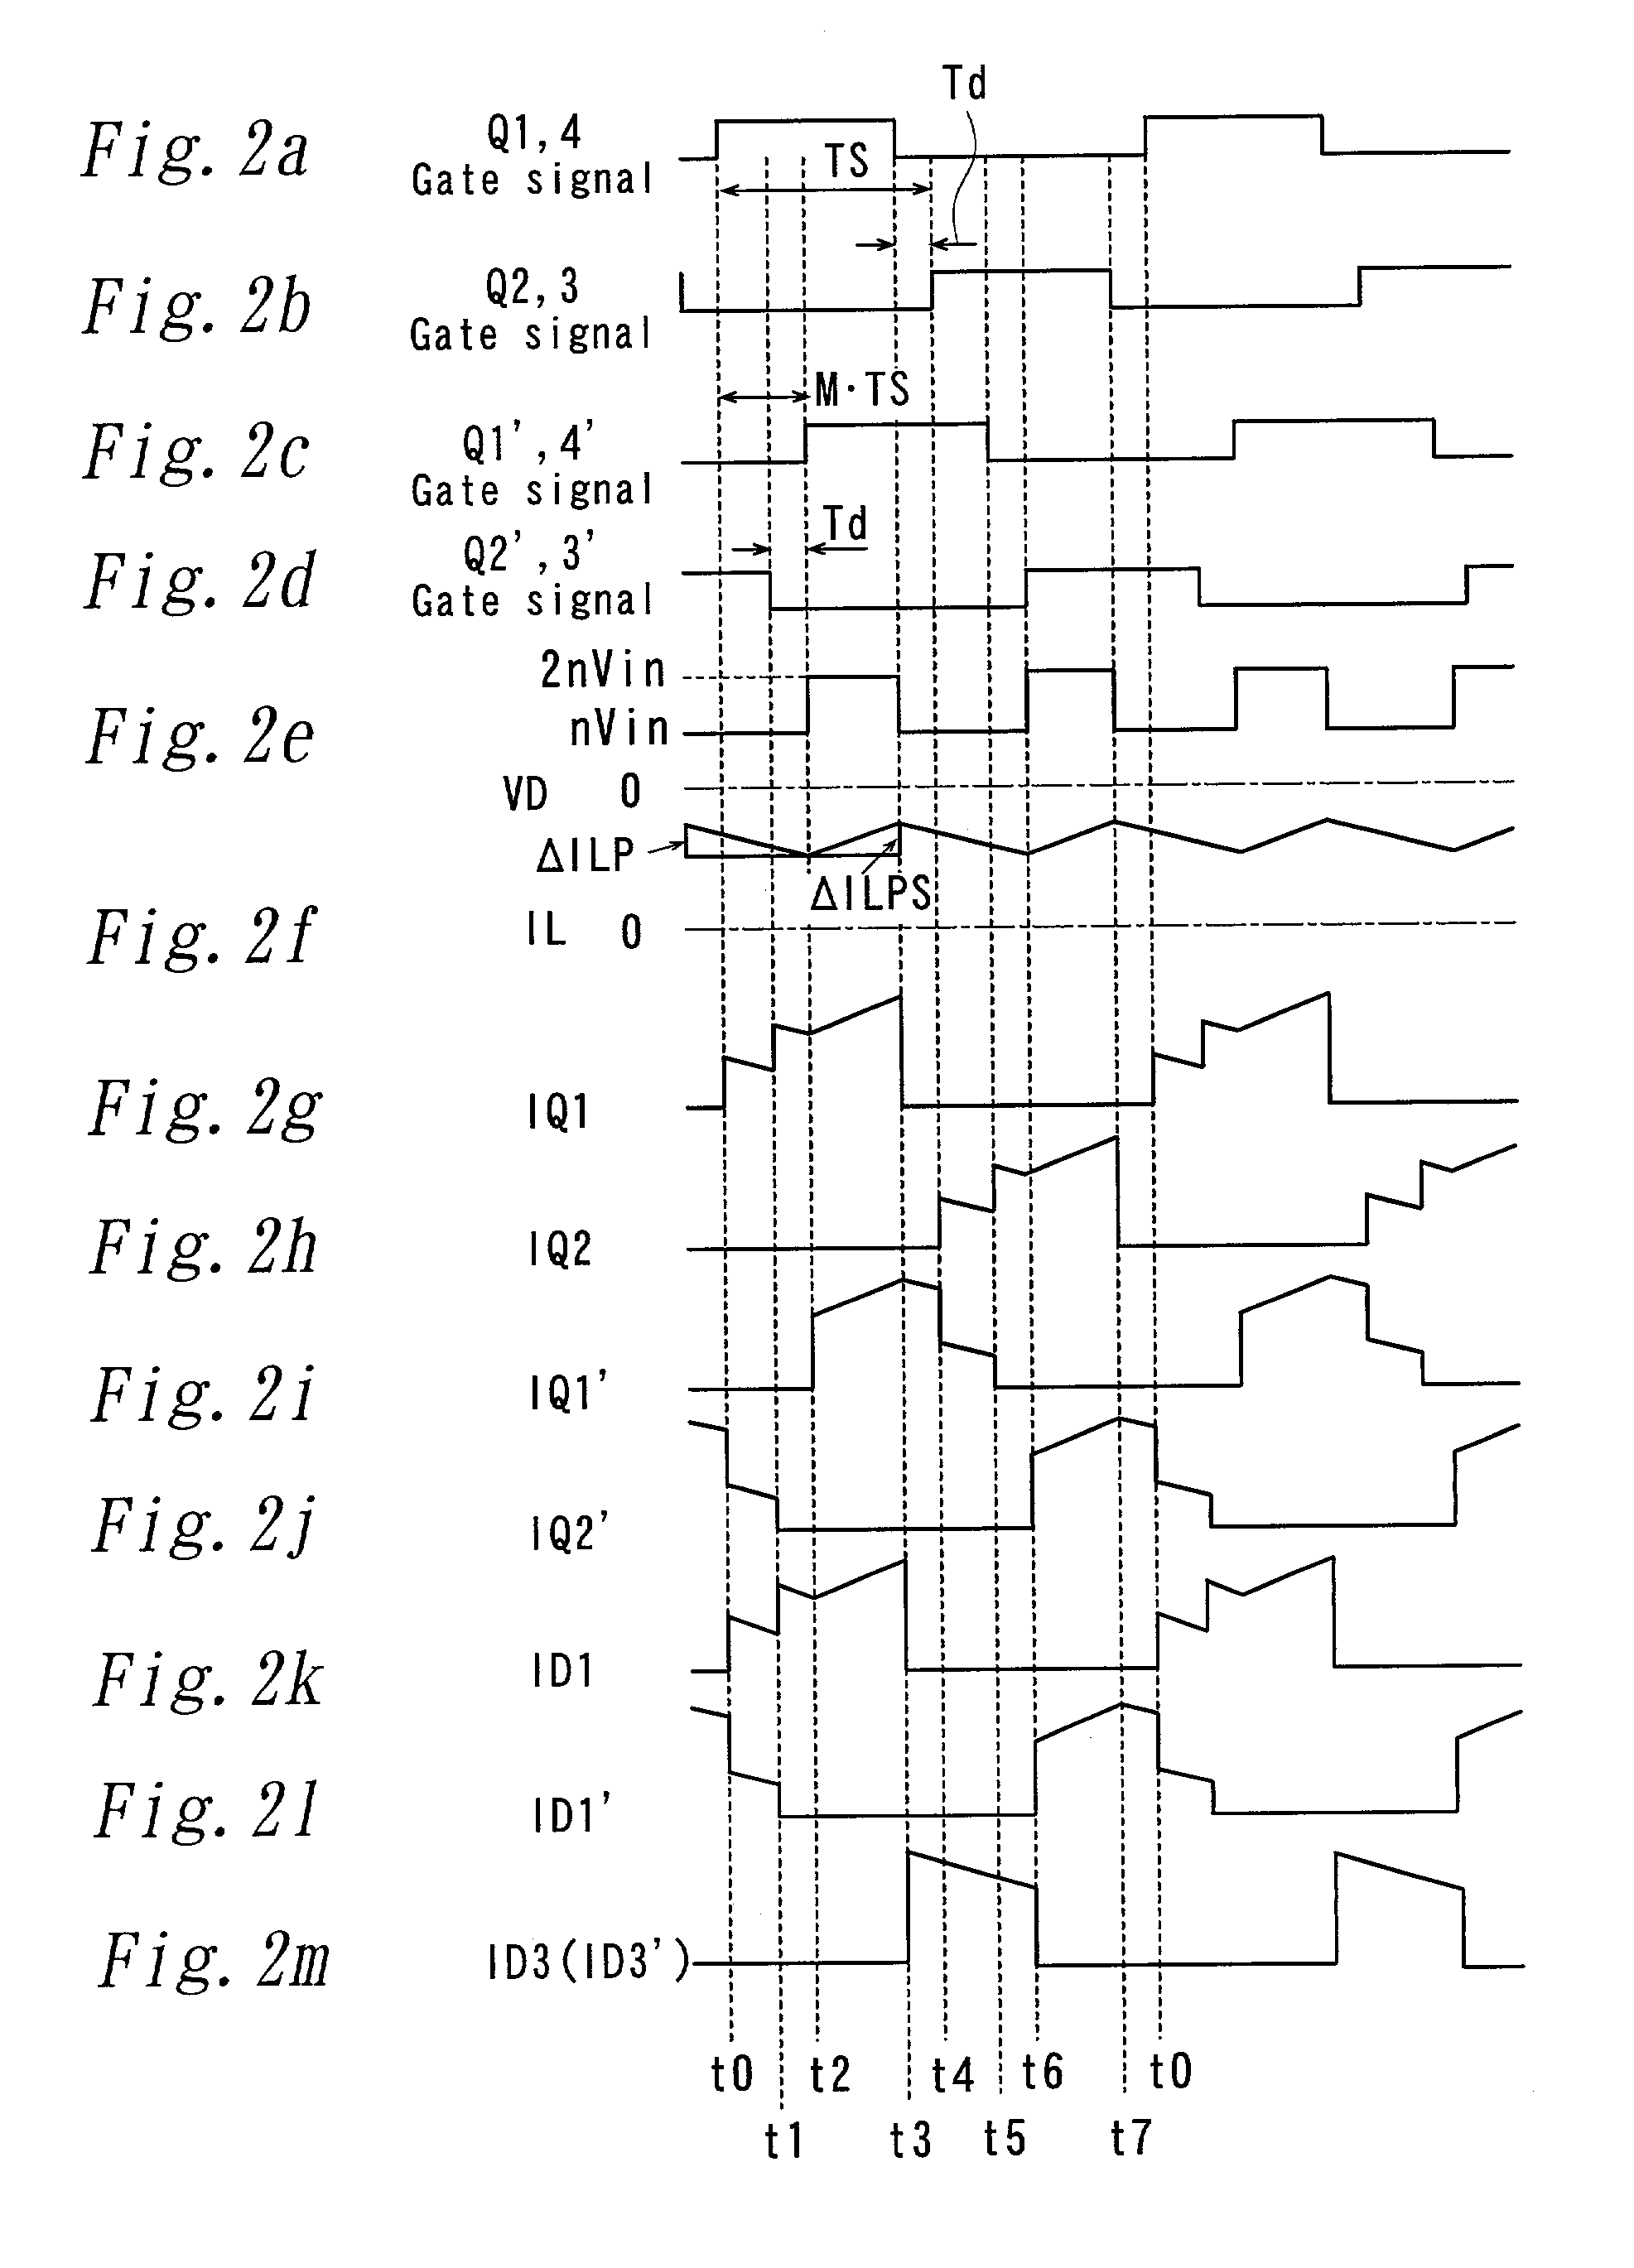 DC power supply device with constant power output level